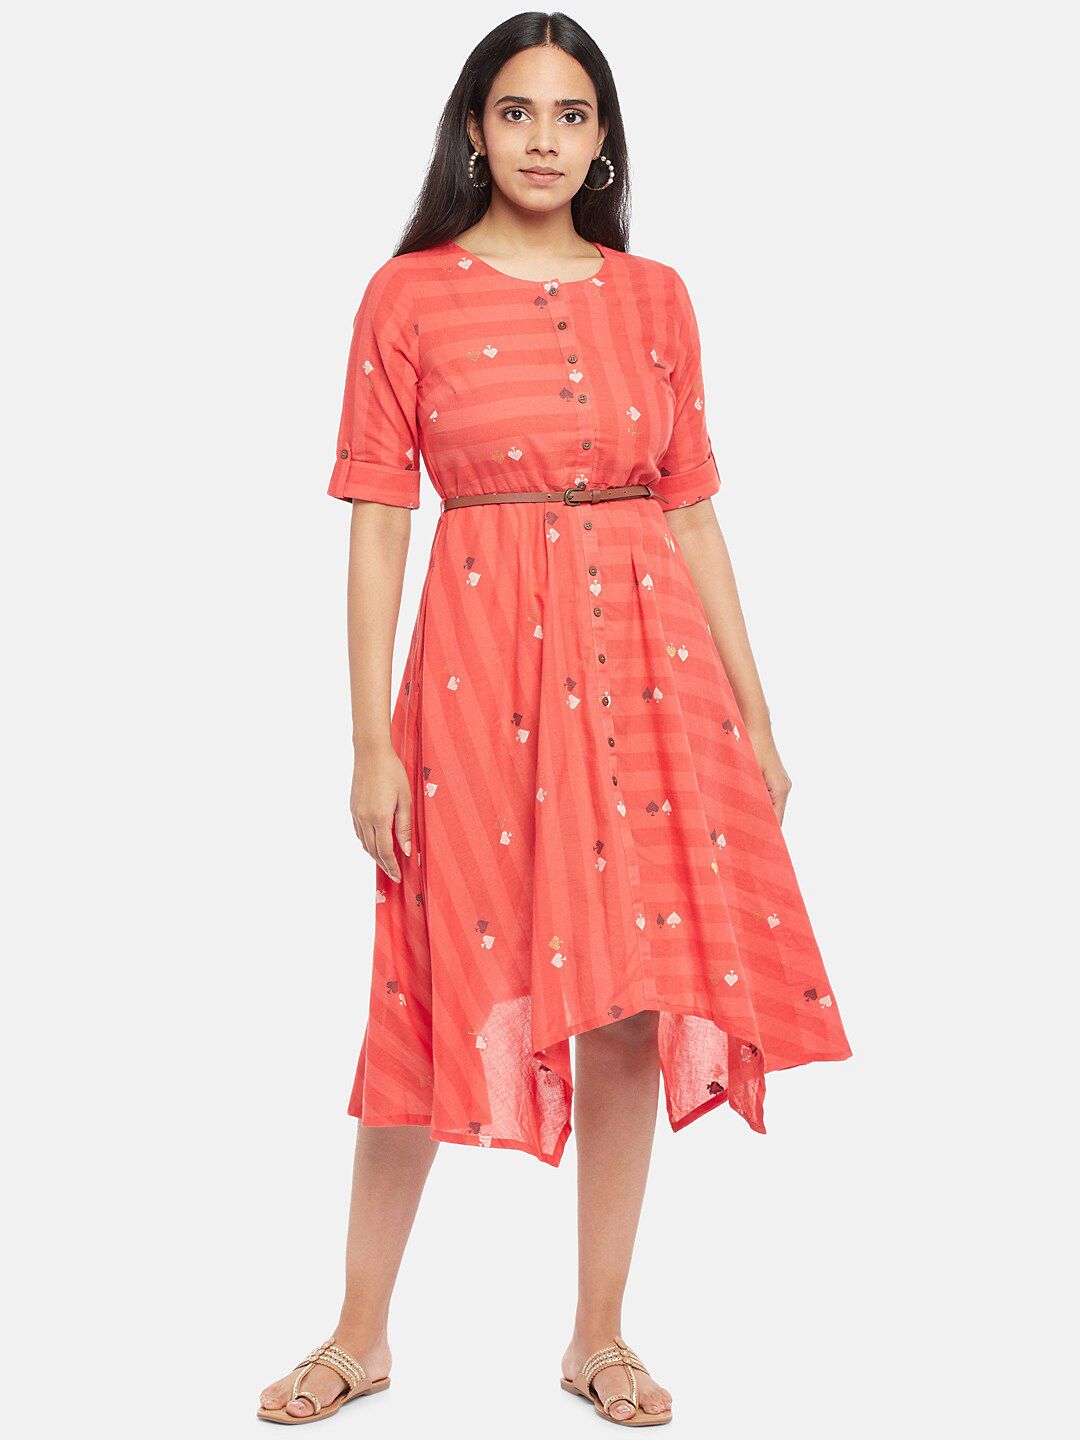 AKKRITI BY PANTALOONS Red Abstract Printed Pure Cotton Midi Fit & Flare Dress Price in India